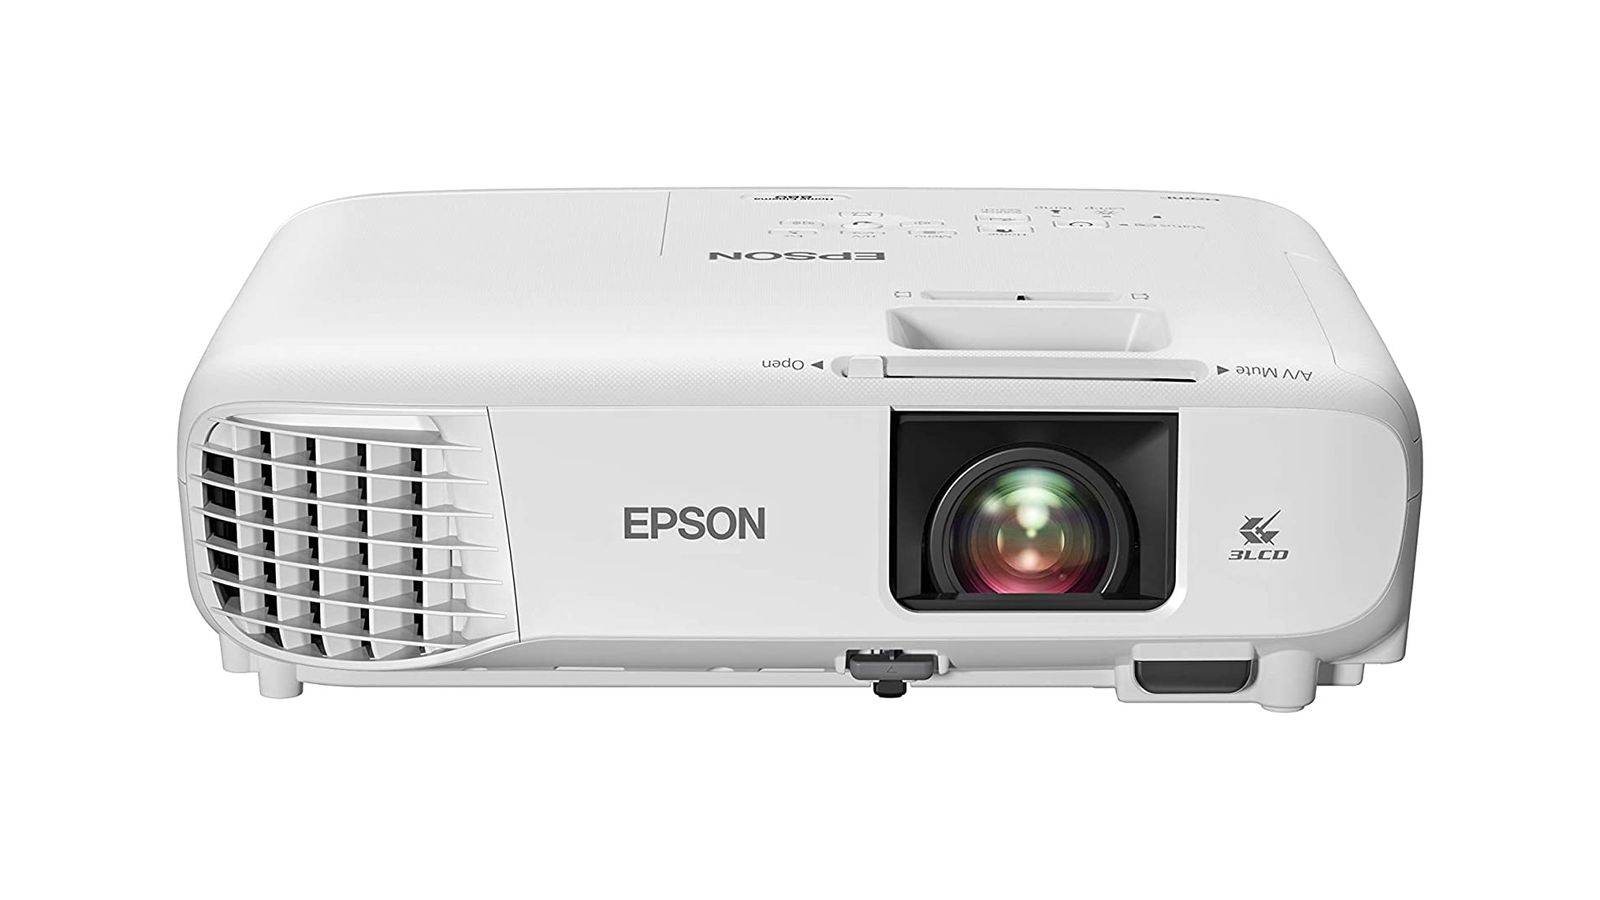 Best tech gift ideas - Epson product image of  a white projector.